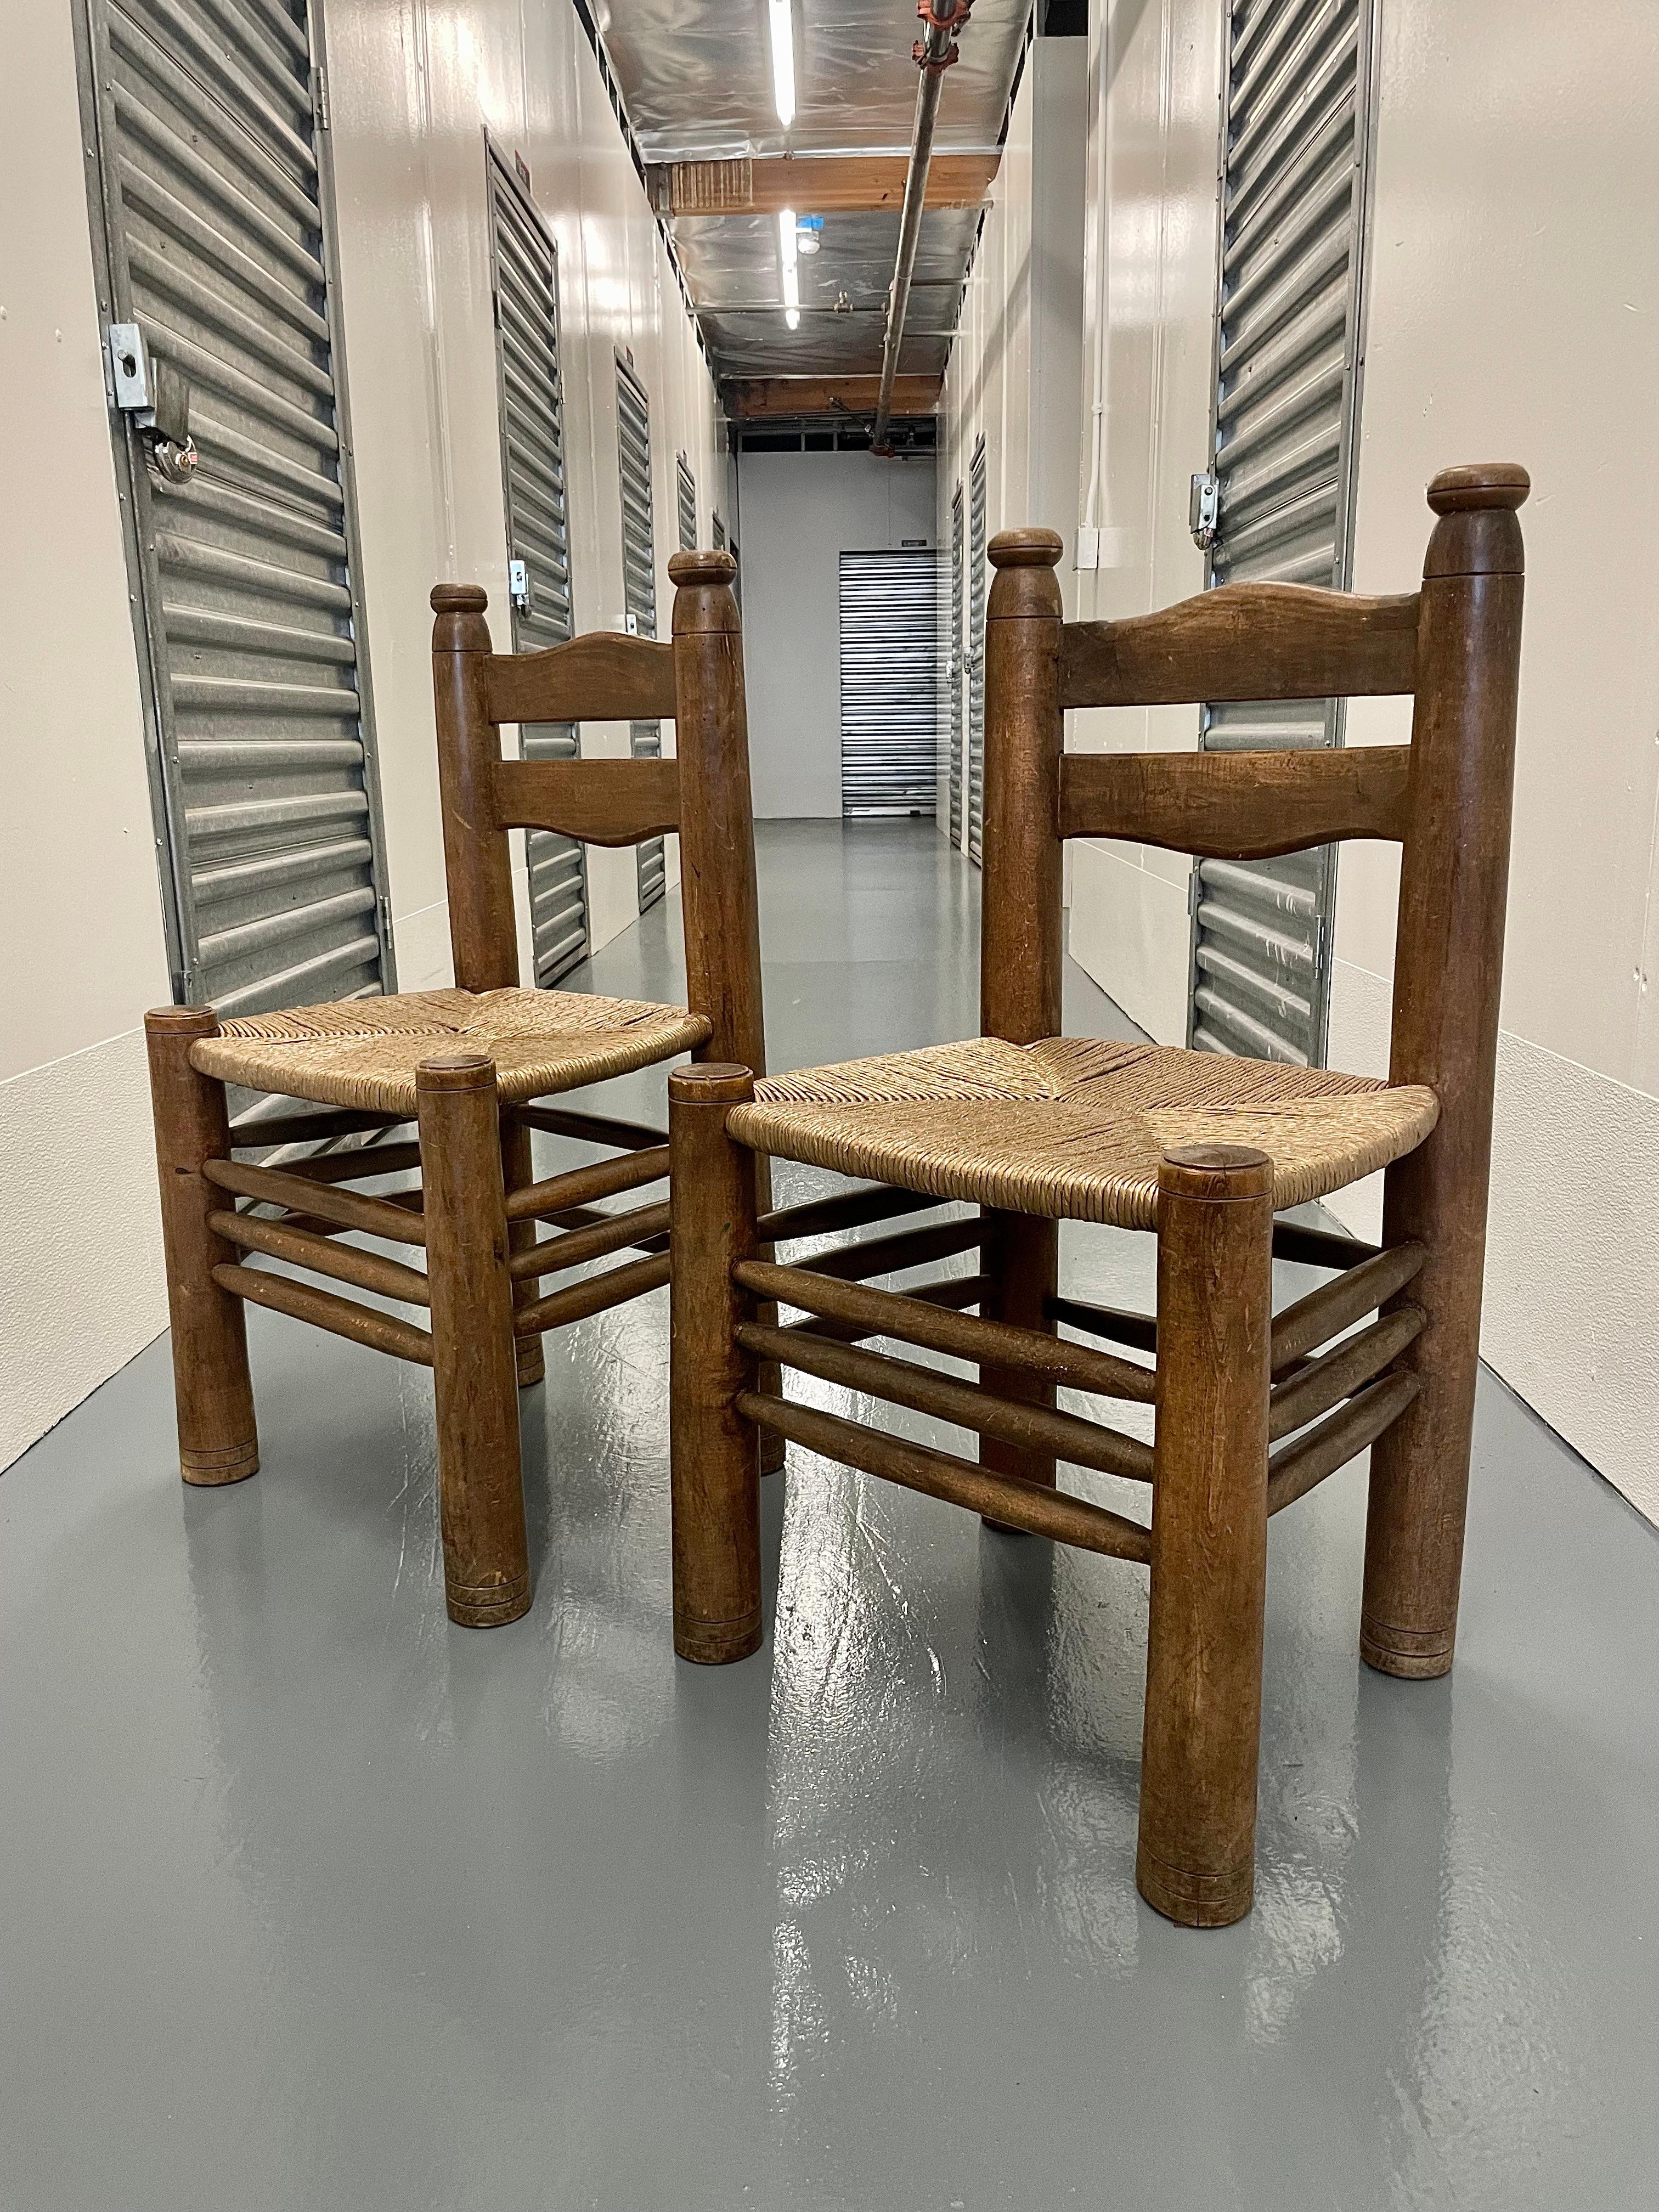 Pair of Mid-Century Brutalist solid wood and rush chairs by Charles Dudouyt, 1940s.

Solid wood construction. Structurally sound for everyday use.

Over 80 years of patina.

Wear consistent with age and use.